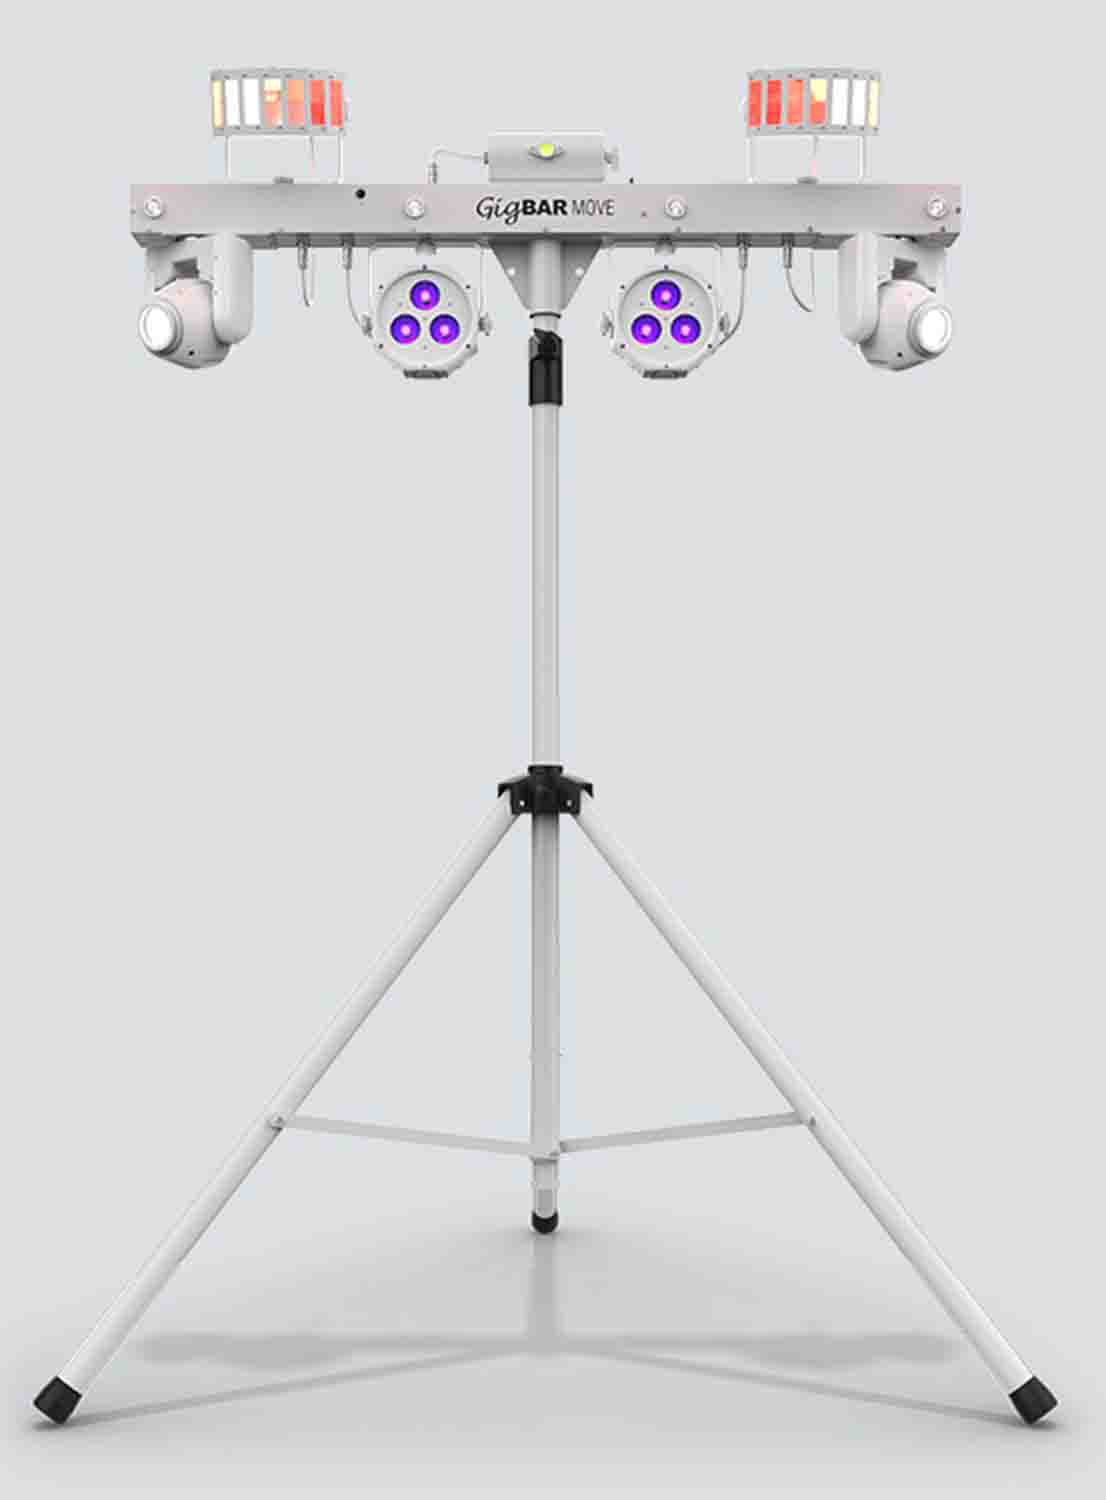 B Stock: Chauvet DJ GIGBAR MOVE 5-in-1 Lighting System with Pre-Mounted On a Single Bar- White by Chauvet DJ